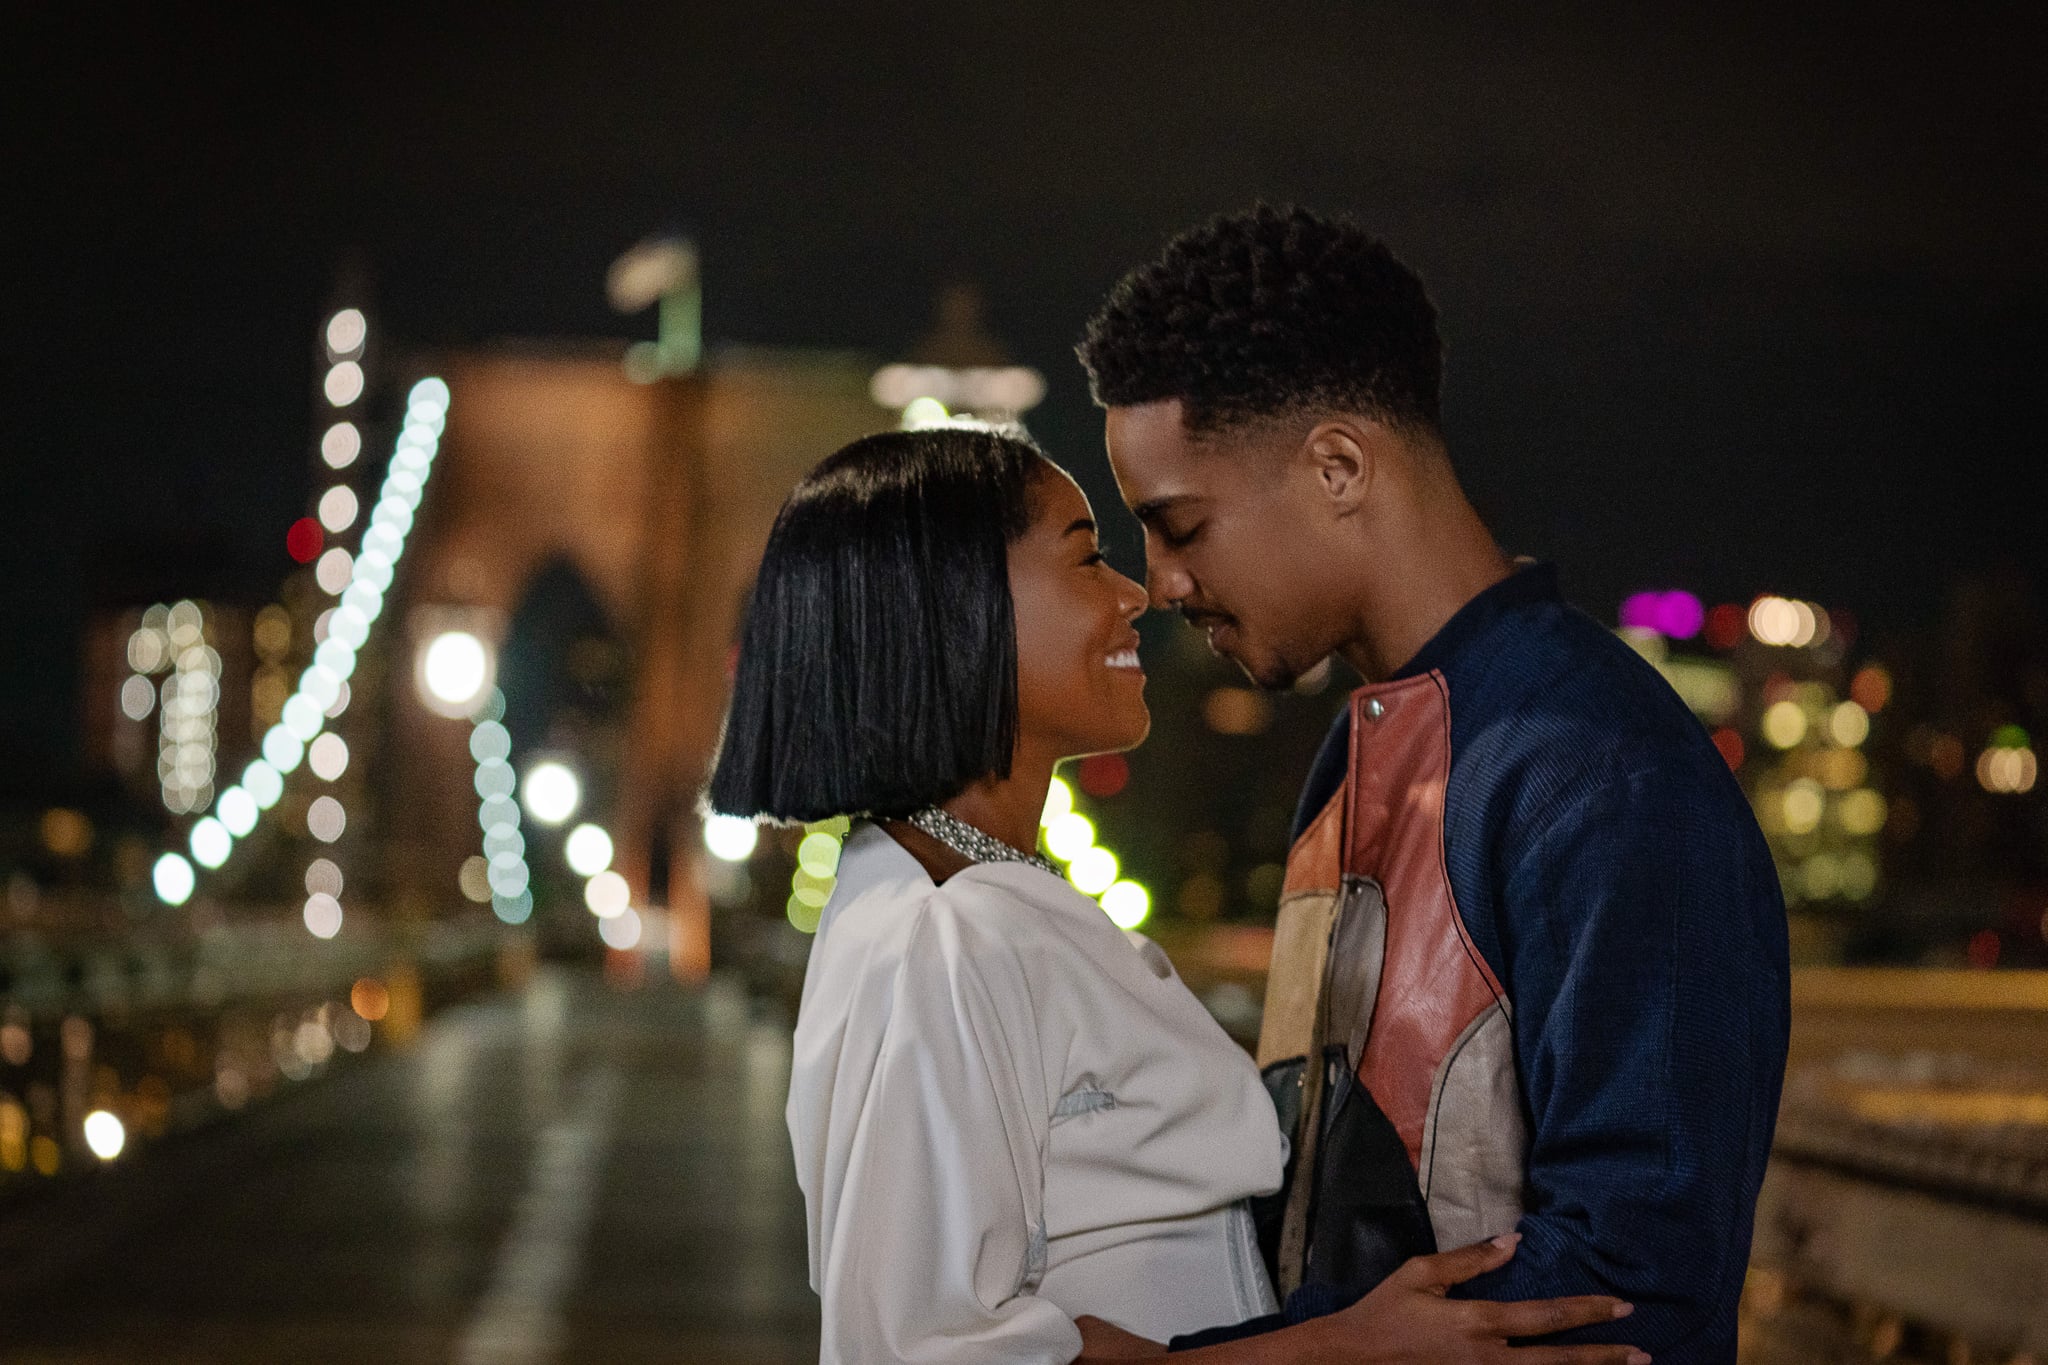 The Perfect Find. (L to R) Gabrielle Union as Jenna and Keith Powers as Eric in The Perfect Find. Cr. Alyssa Longchamp/Netflix © 2023